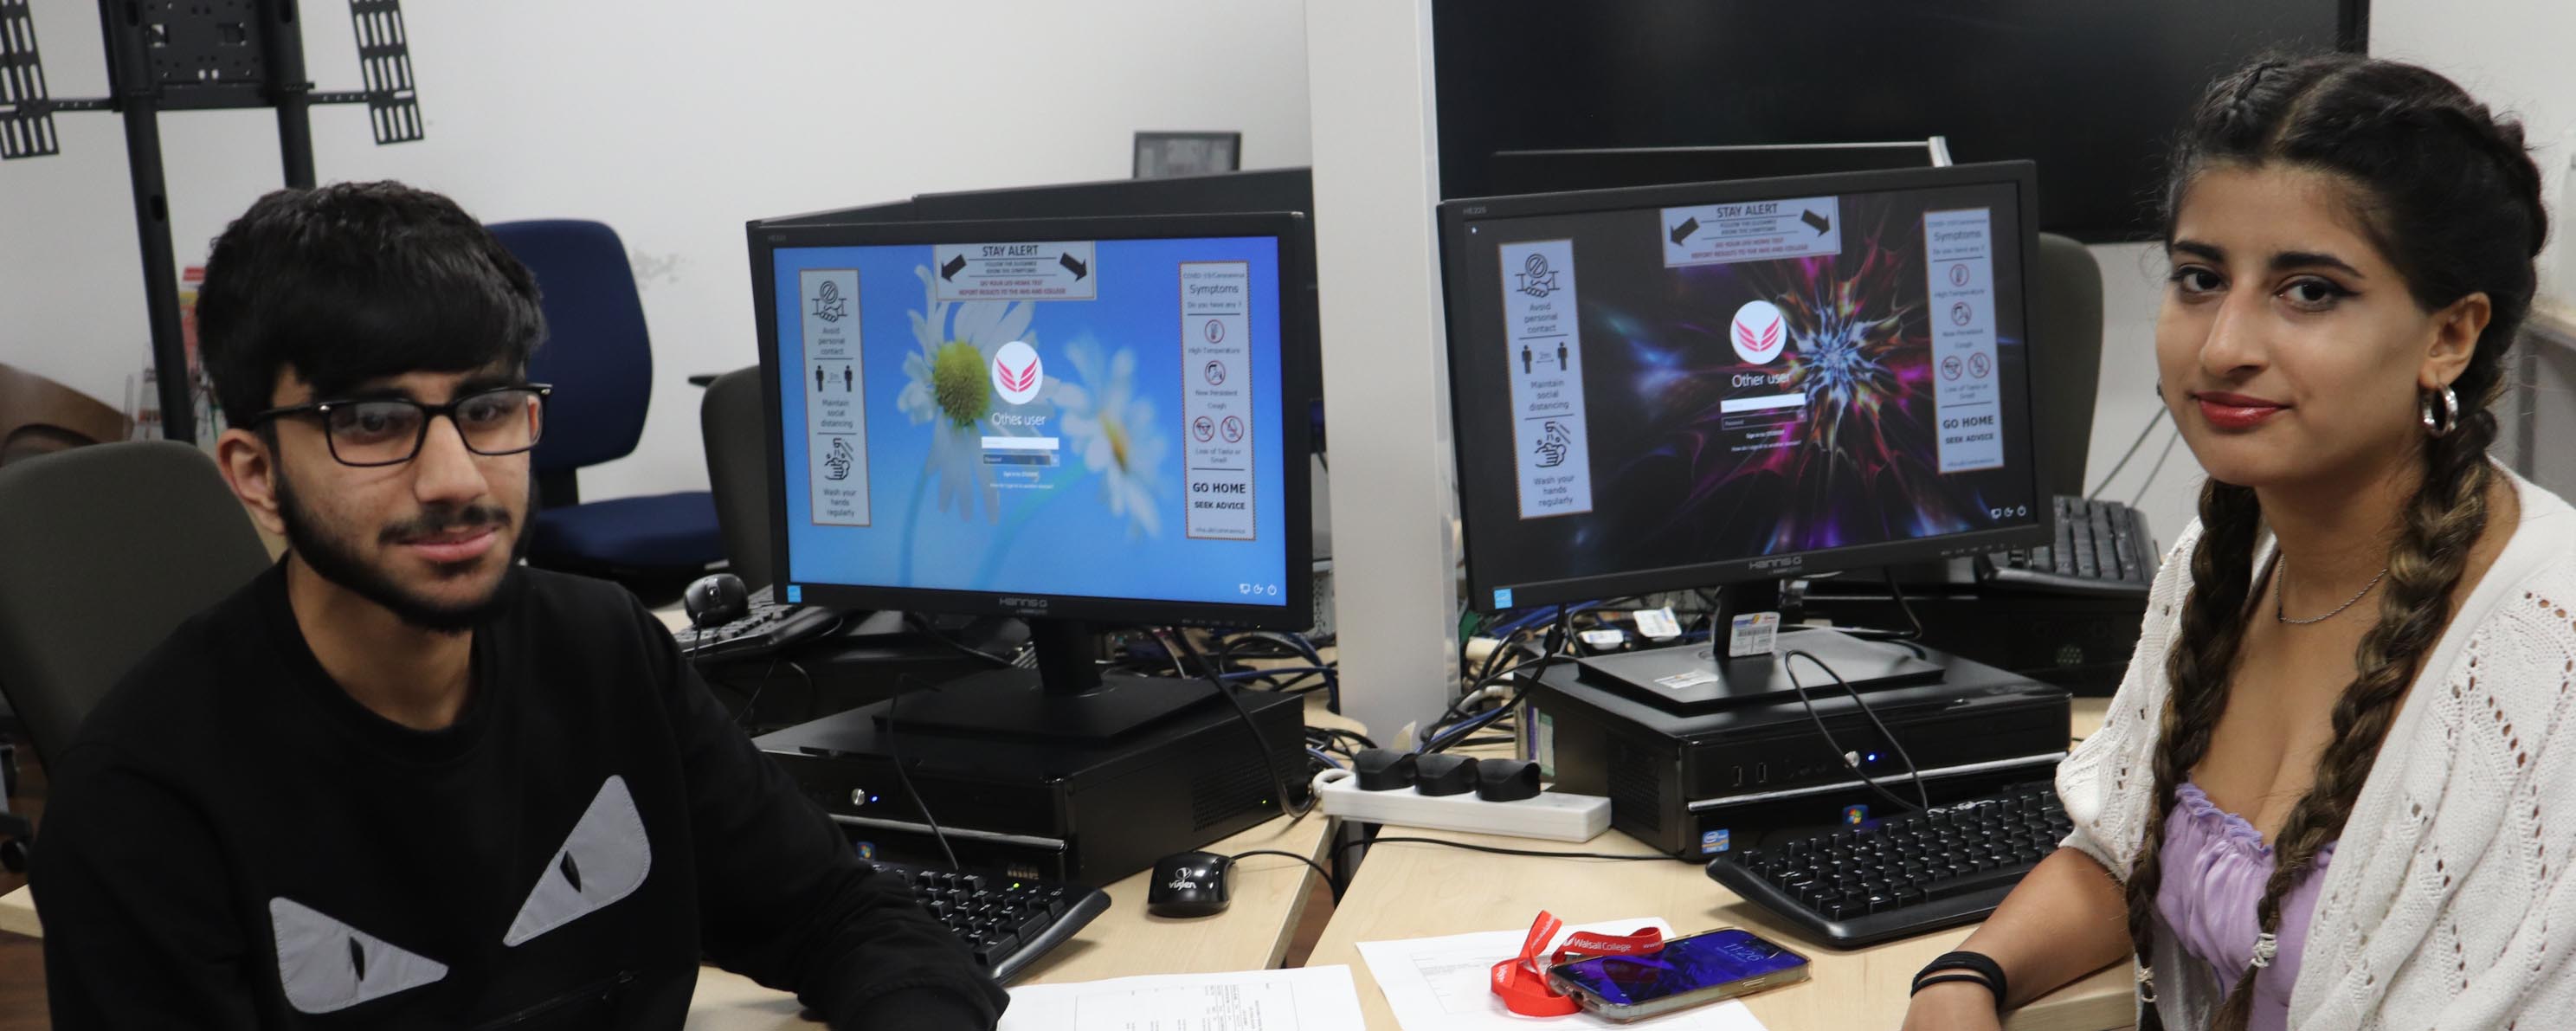 male and female computing students by desktop screens facing